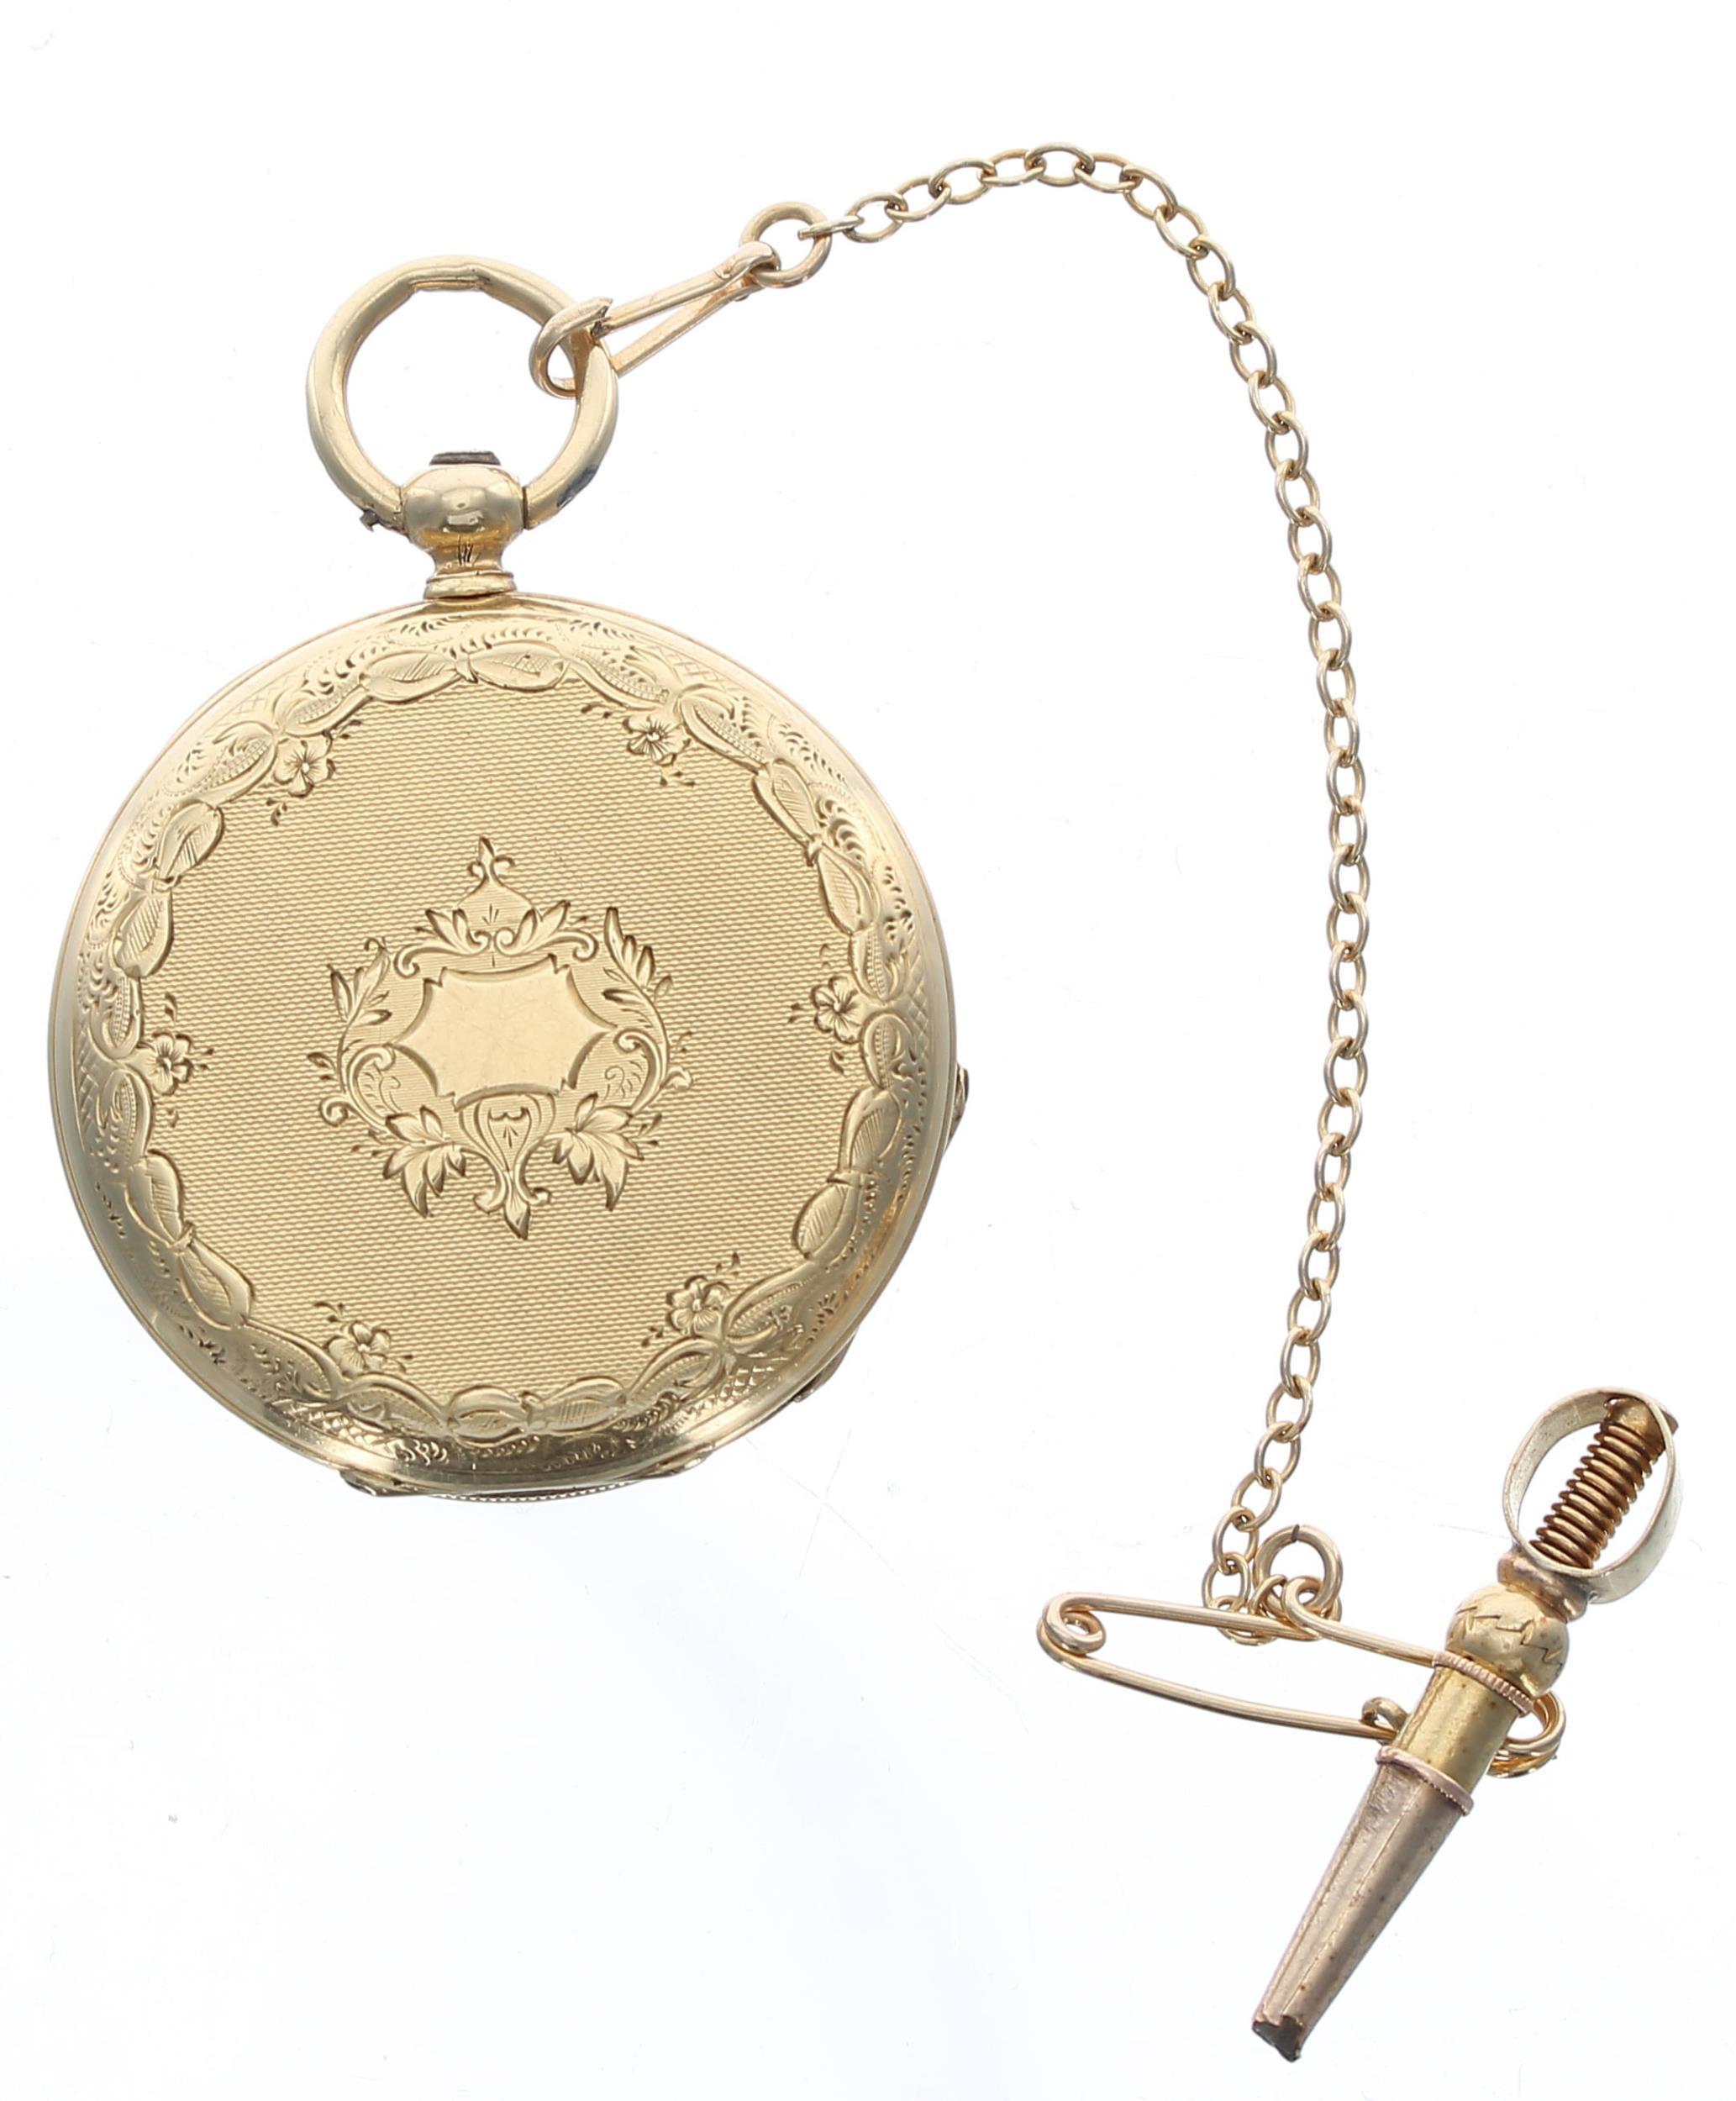 Attractive small 18k Continental cylinder hunter fob watch, gilt frosted bar movement, inscribed